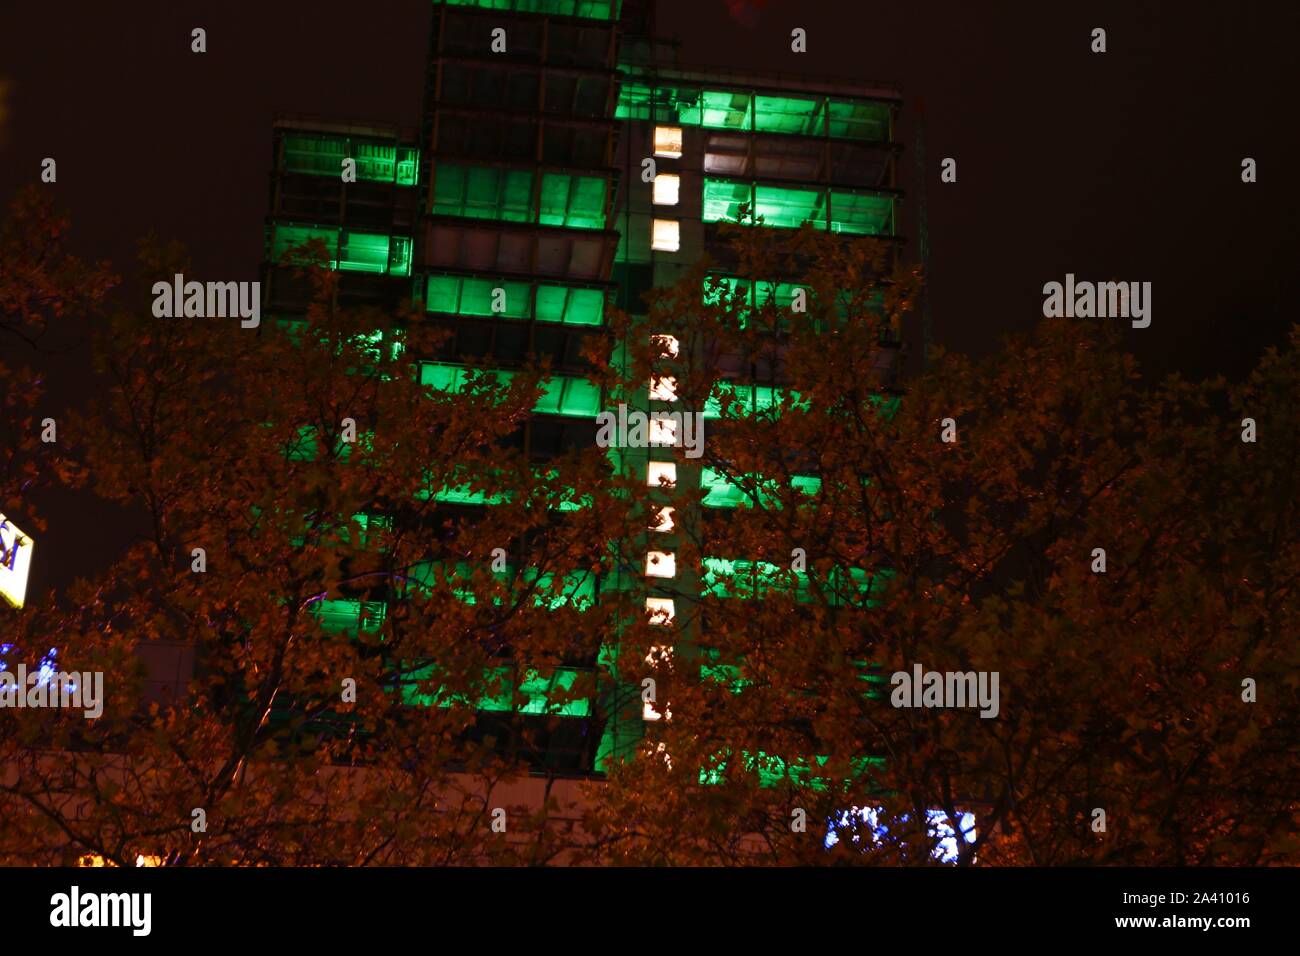 Berlin, Germany. 10th Oct, 2019. The light festival 'Berlin lights' has begun. It is under the motto 'Light changes' this year. Artists from all over the world illuminate different places and buildings in the city with colorful colors - including the Steglitzer Kreisel. At the Berlin Festival, light artists are setting spectacular pictures of buildings in the city with light and projections. The photo shows the Steglitzer spinning top illuminated in color in the evening. (Photo by Simone Kuhlmey/Pacific Press) Credit: Pacific Press Agency/Alamy Live News Stock Photo